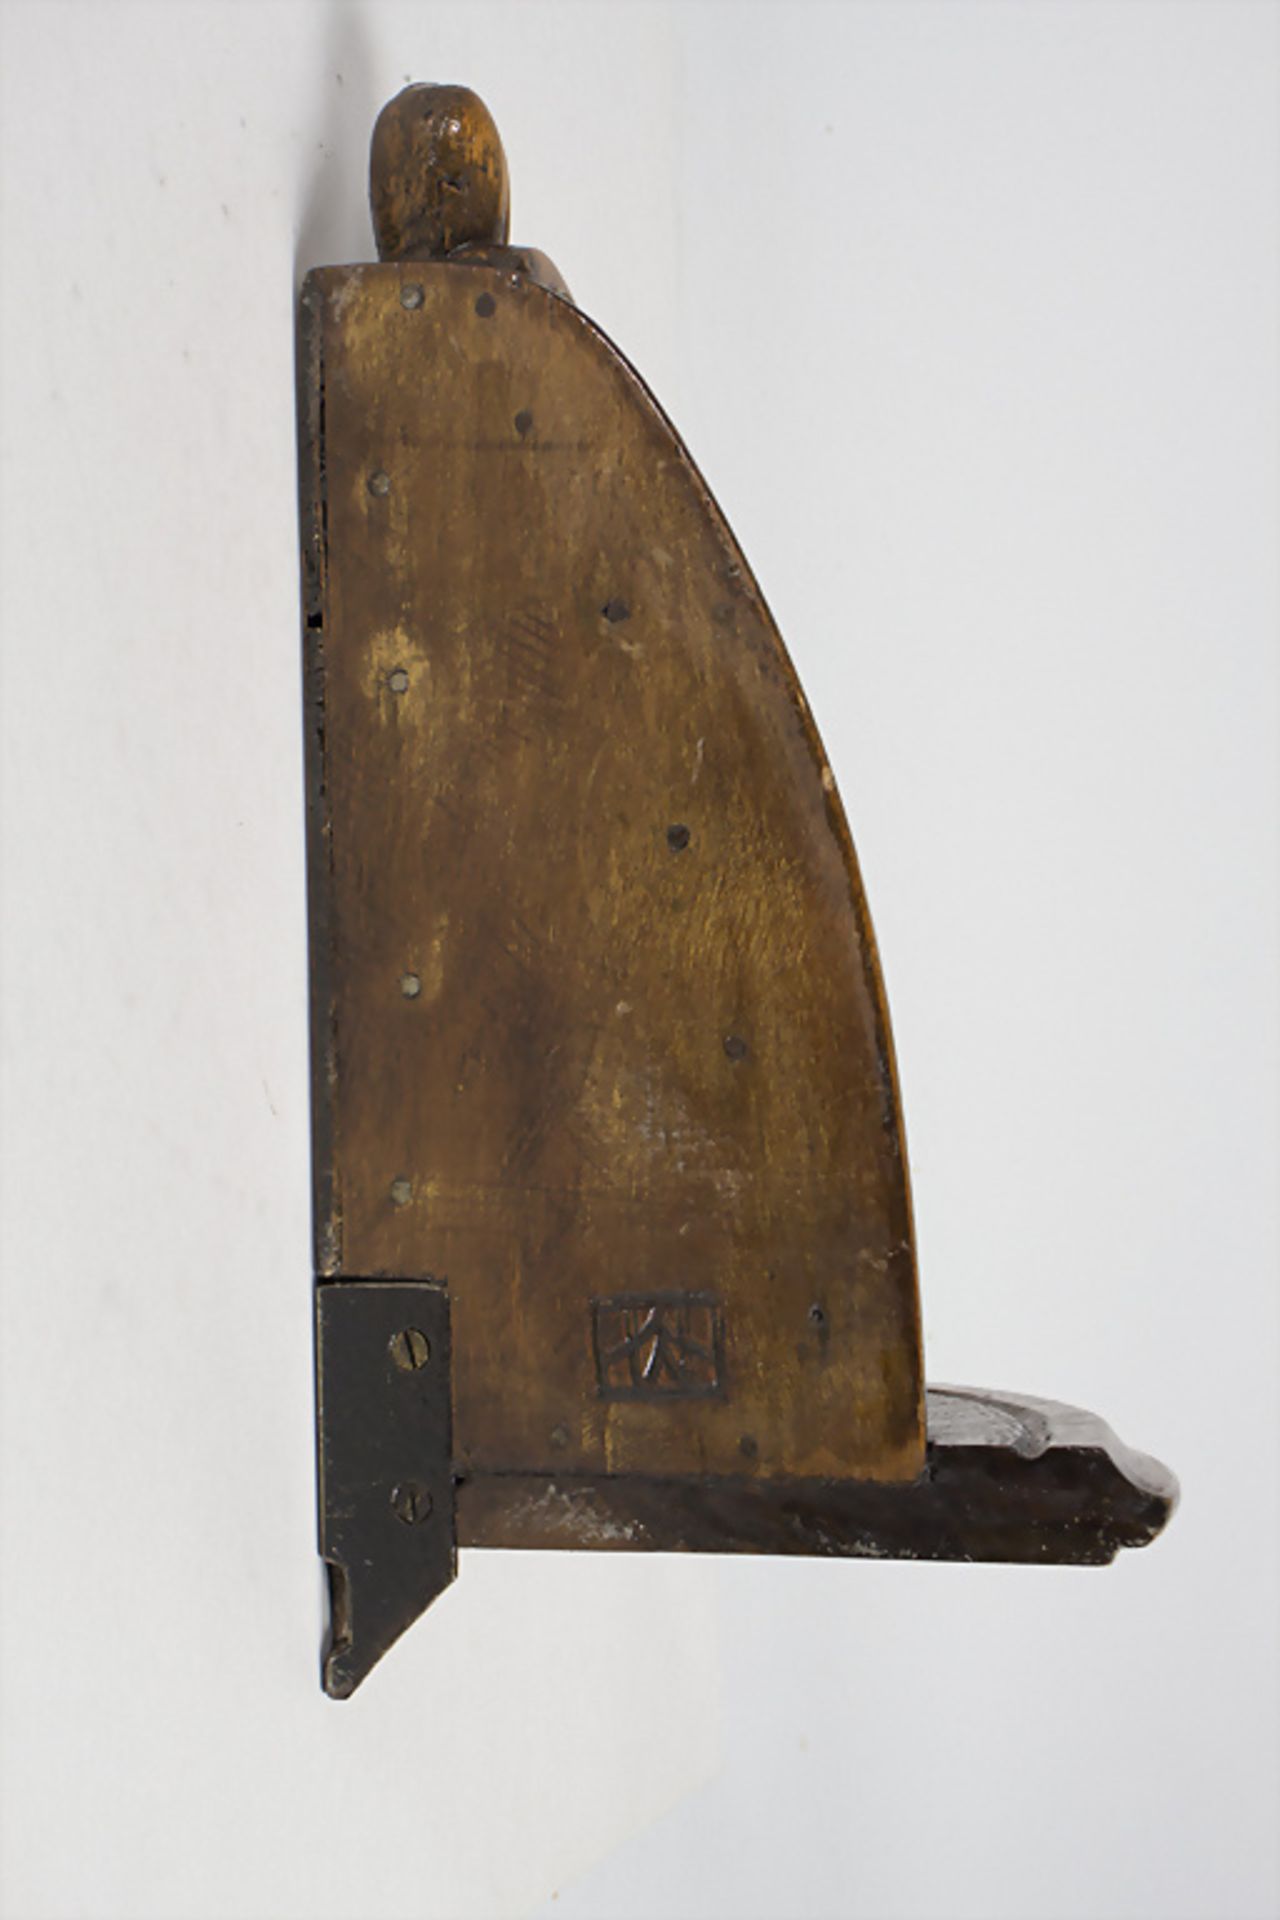 Eckkonsole mit Frauenkopf / A wooden console with the head of a young woman, 1970 - Bild 3 aus 5